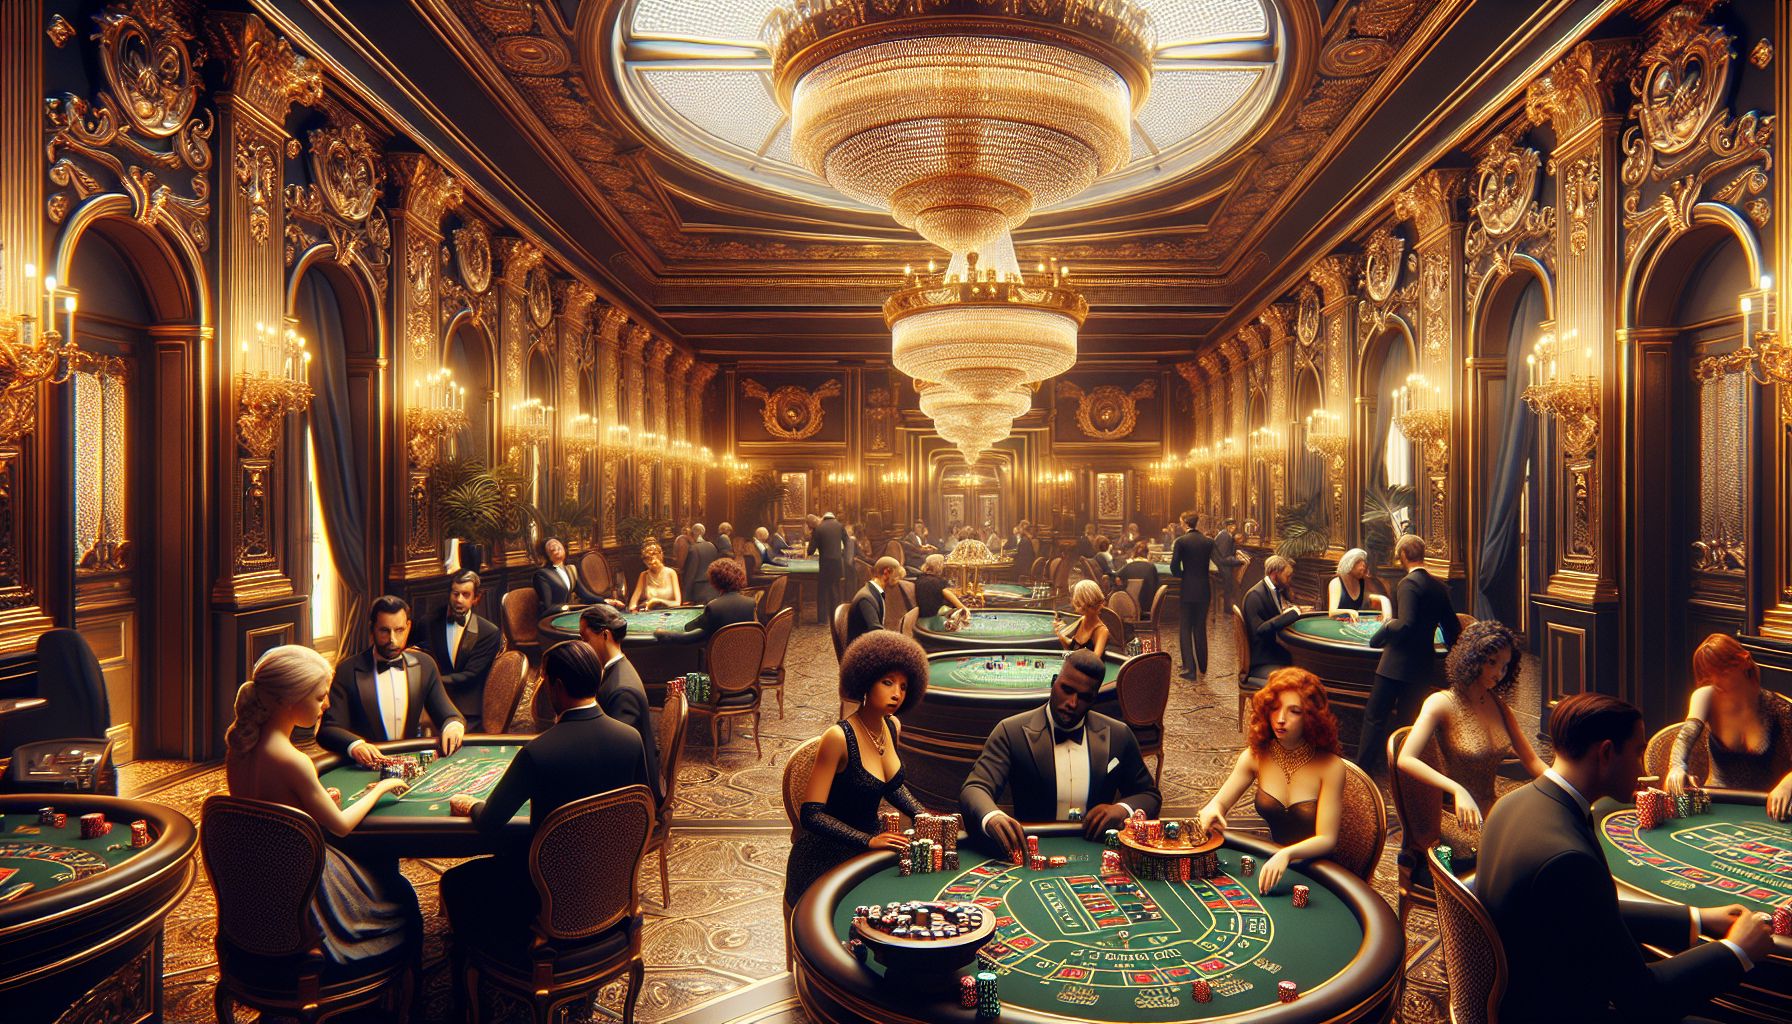 Casino Royalty: A Regal Dive into Opulent Gaming